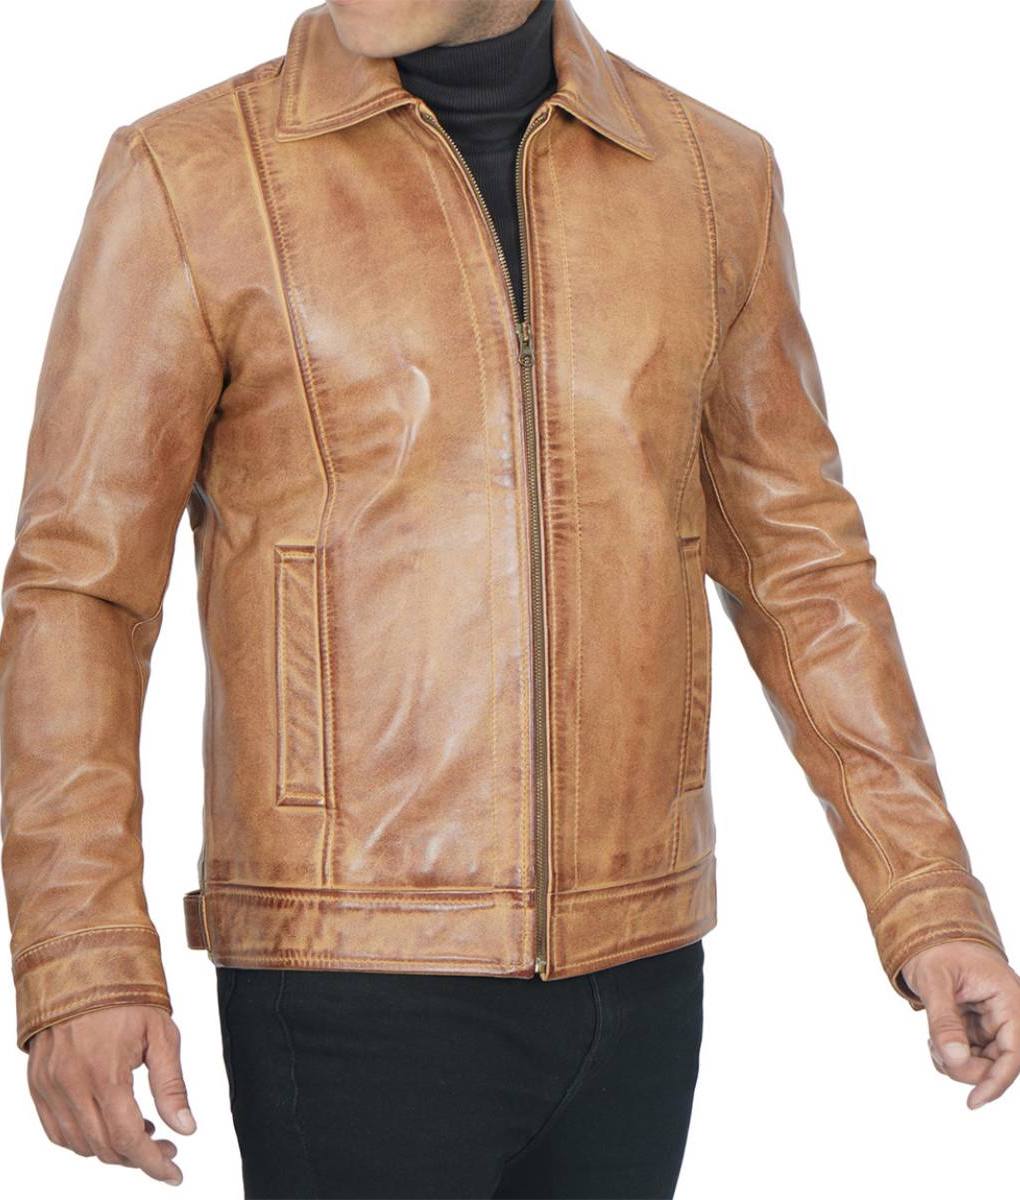 mens_yellow_real_lambskin_leather_jacket